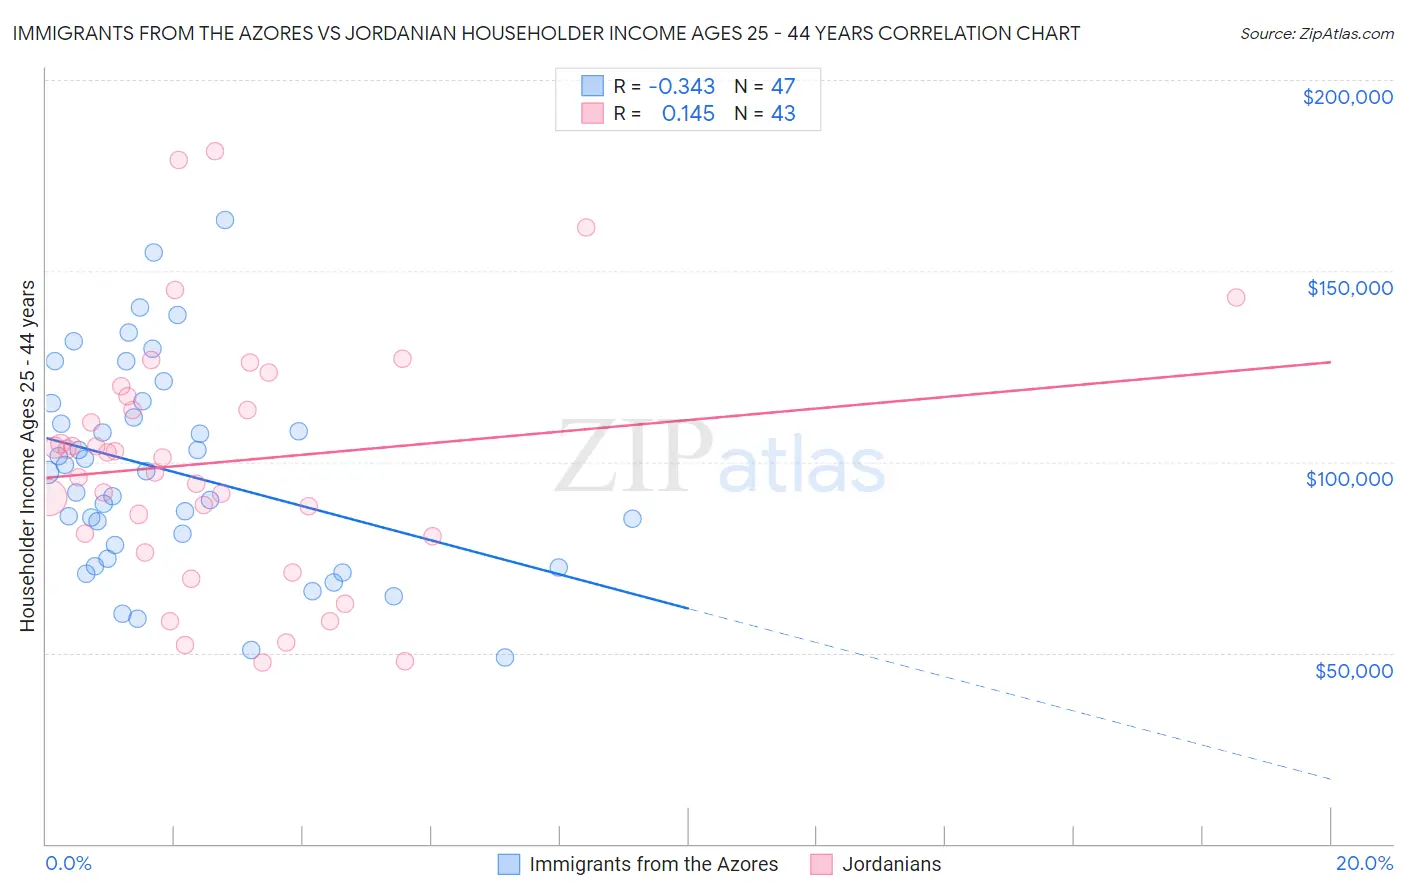 Immigrants from the Azores vs Jordanian Householder Income Ages 25 - 44 years